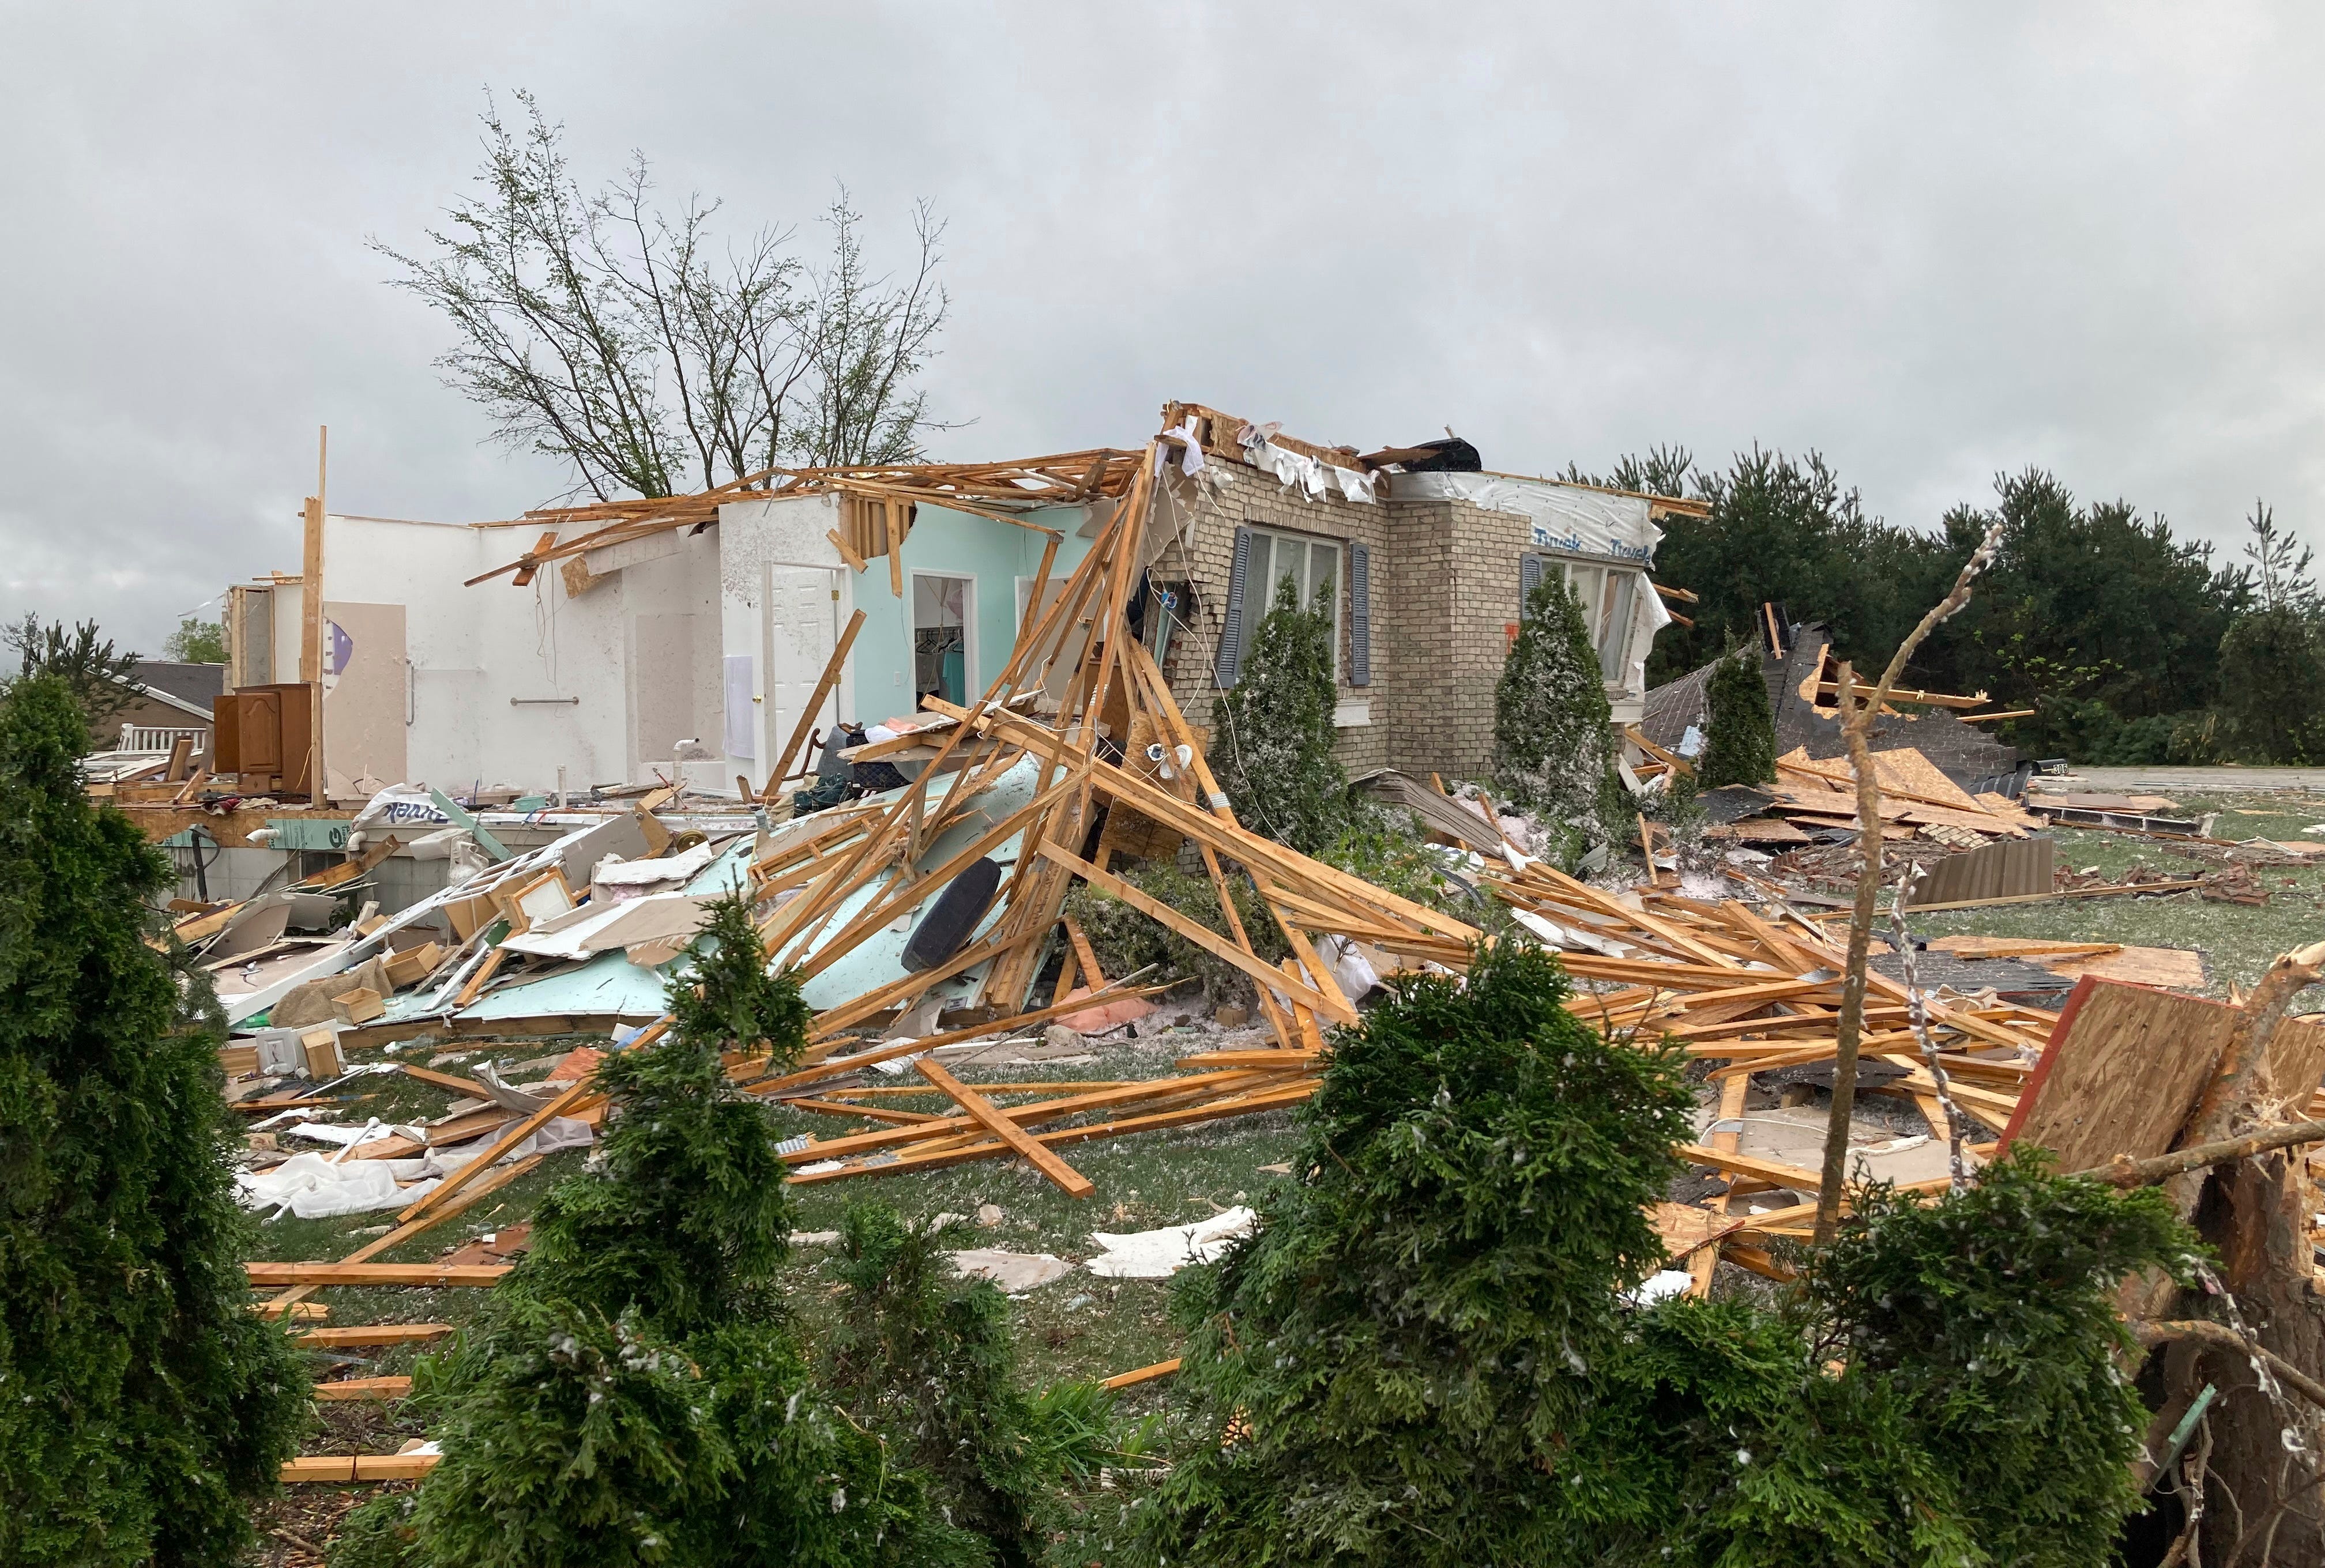 Damage is seen at a home after a tornado came through the area in Gaylord, Mich., Friday, May 20, 2022.